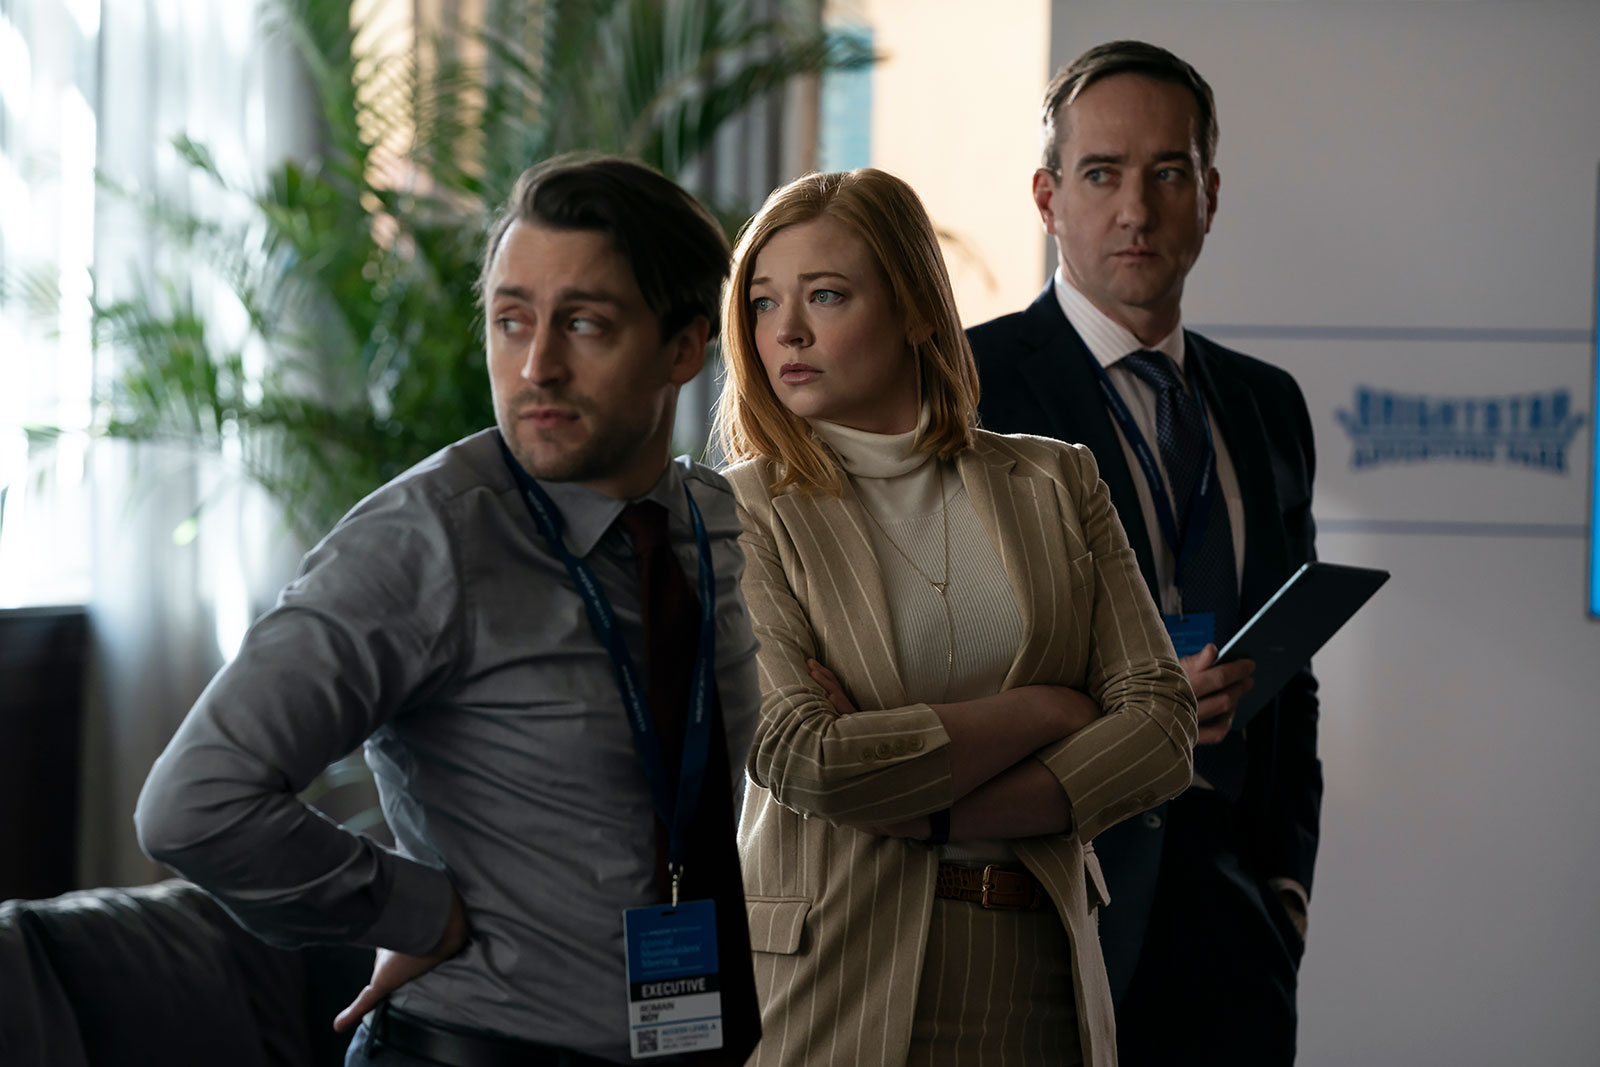 From left to right, Kieran Culkin, Sarah Snook and Matthew Macfadyen are seen in an episode of Succession.